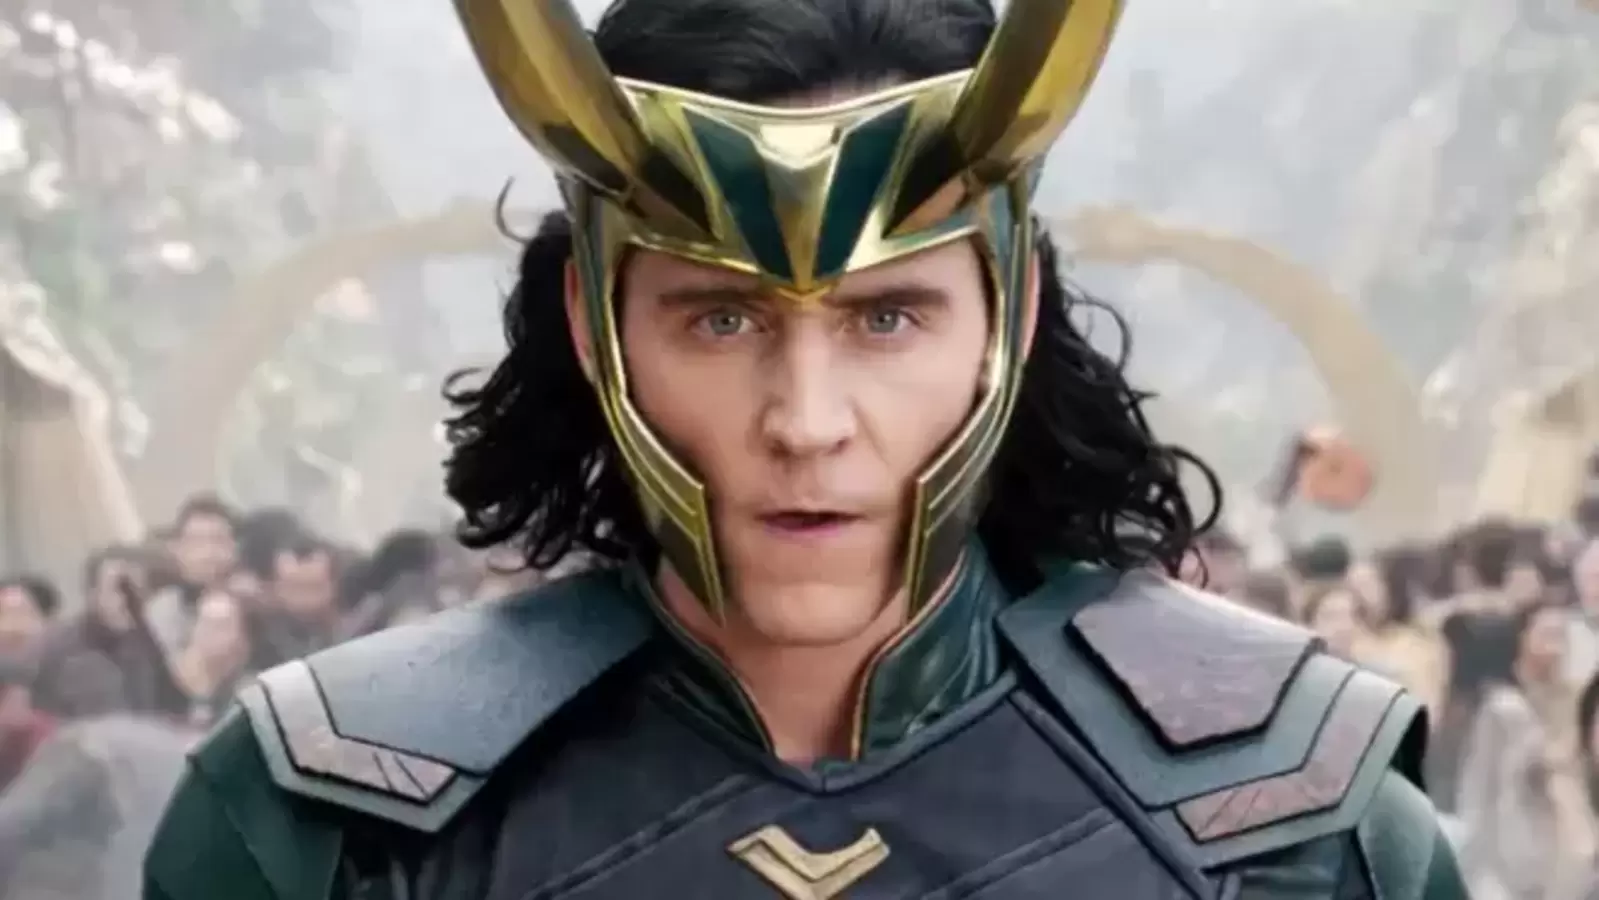 New Doctor Strange in the Multiverse of Madness leak hints at Tom Hiddleston’s Loki’s appearance in film